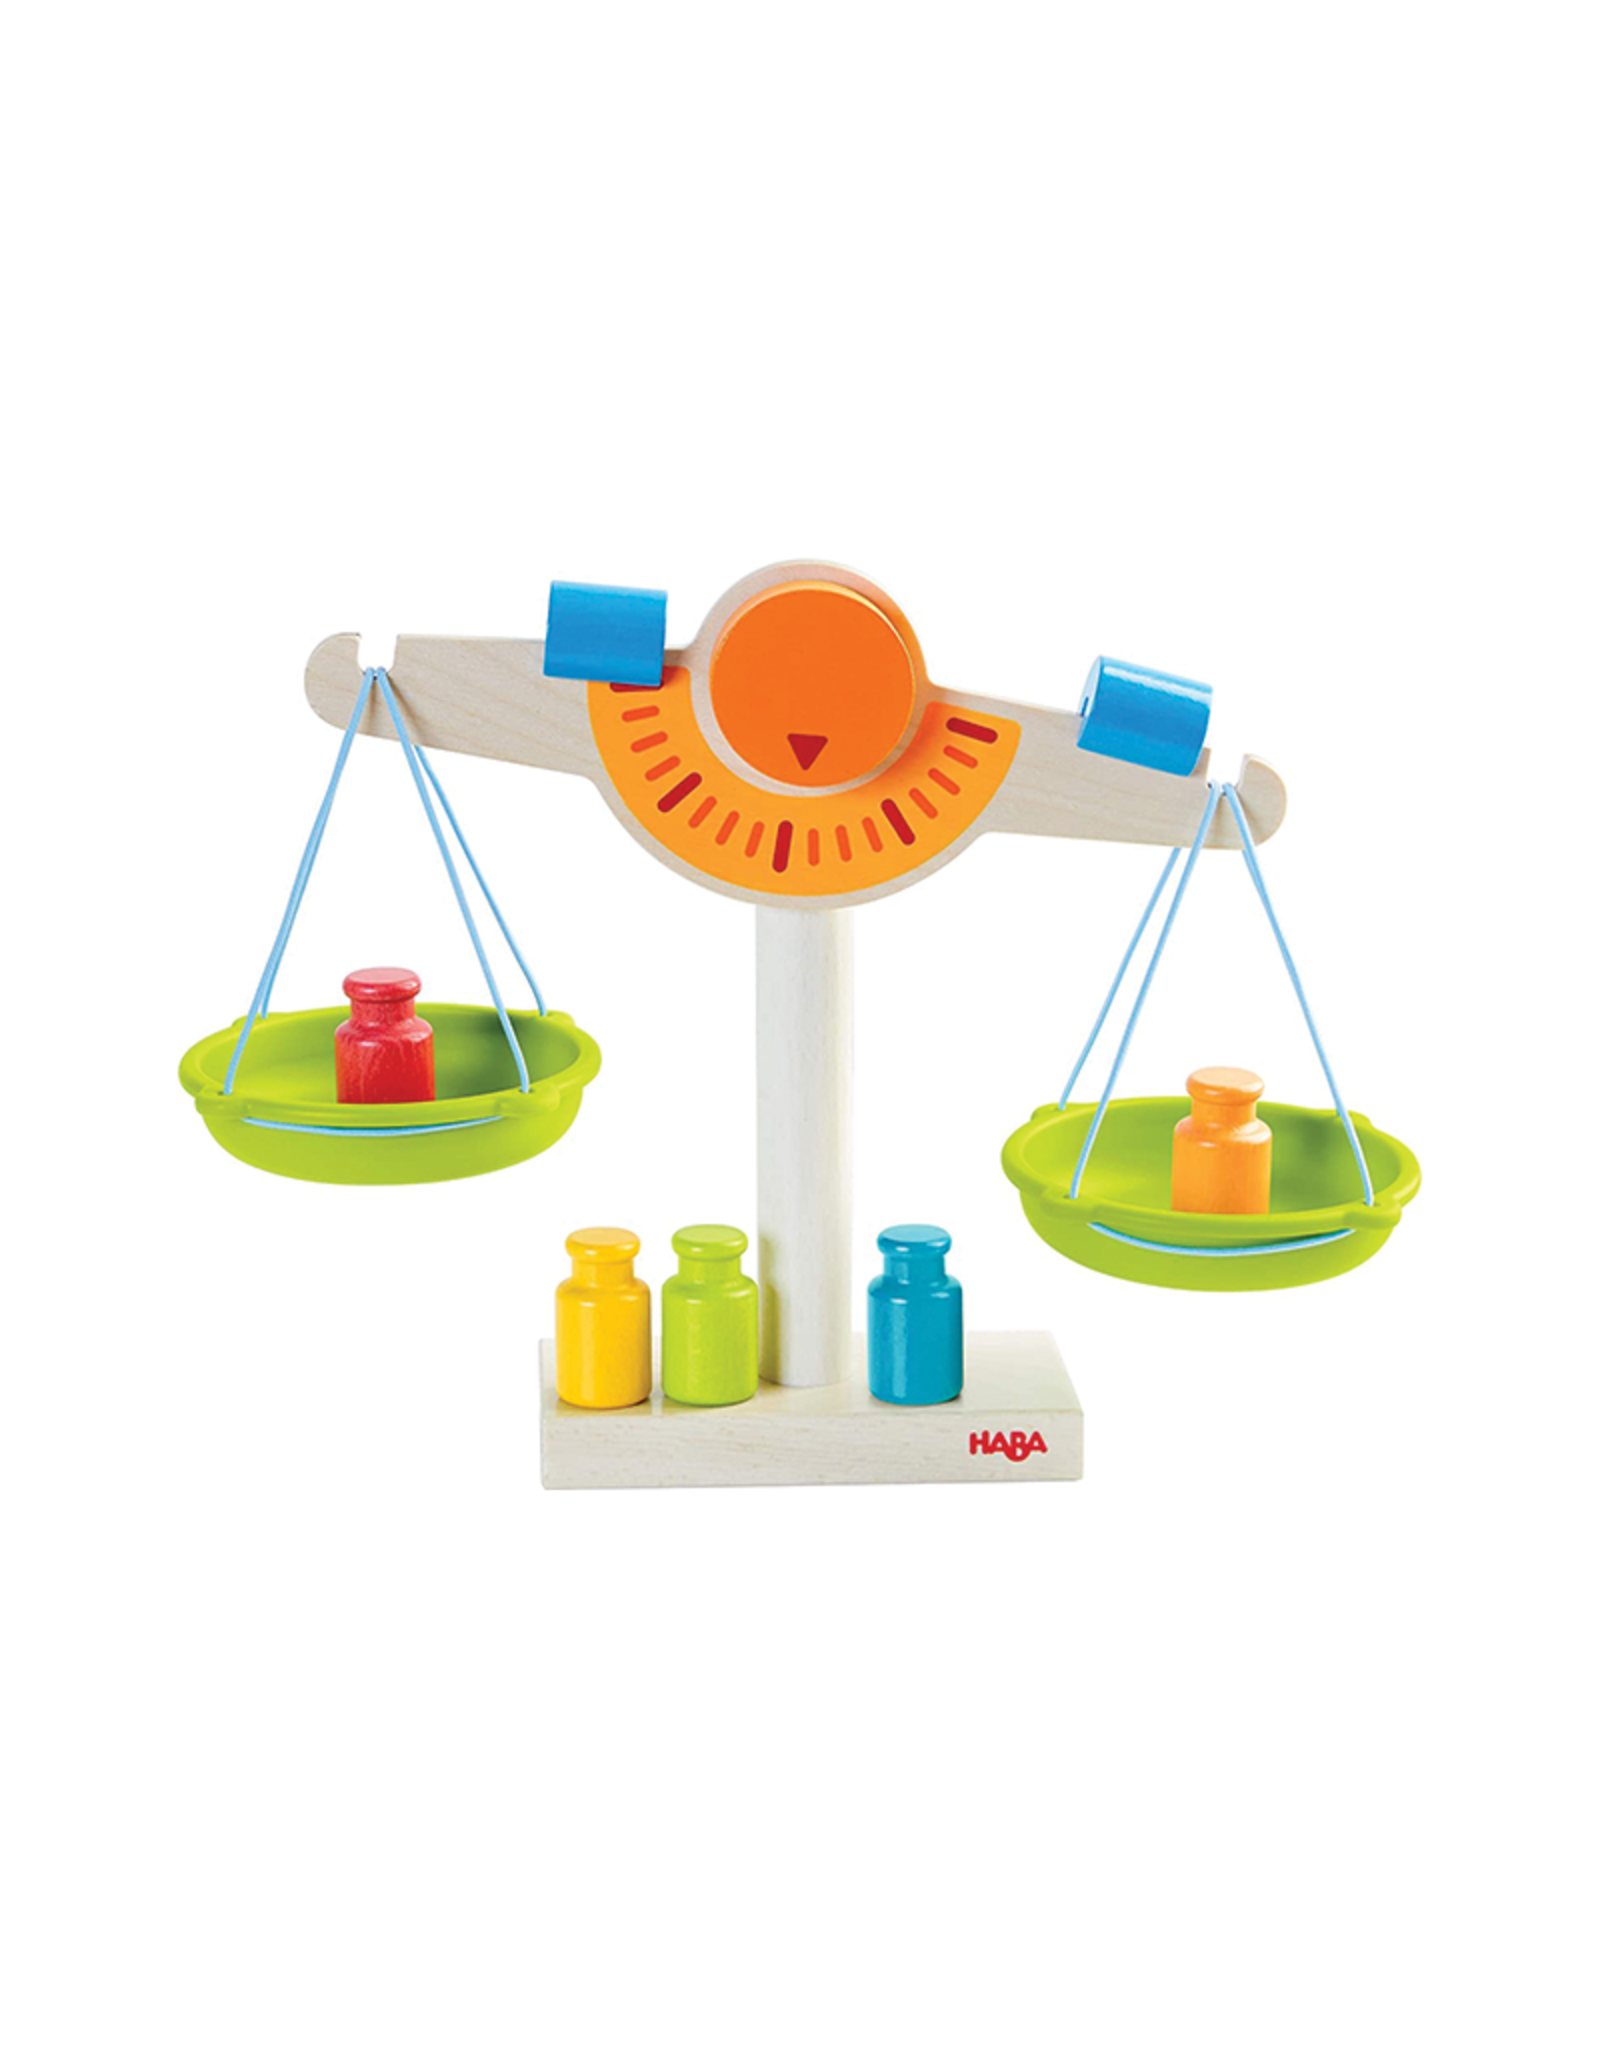 Haba Haba Play Store Wooden Scale